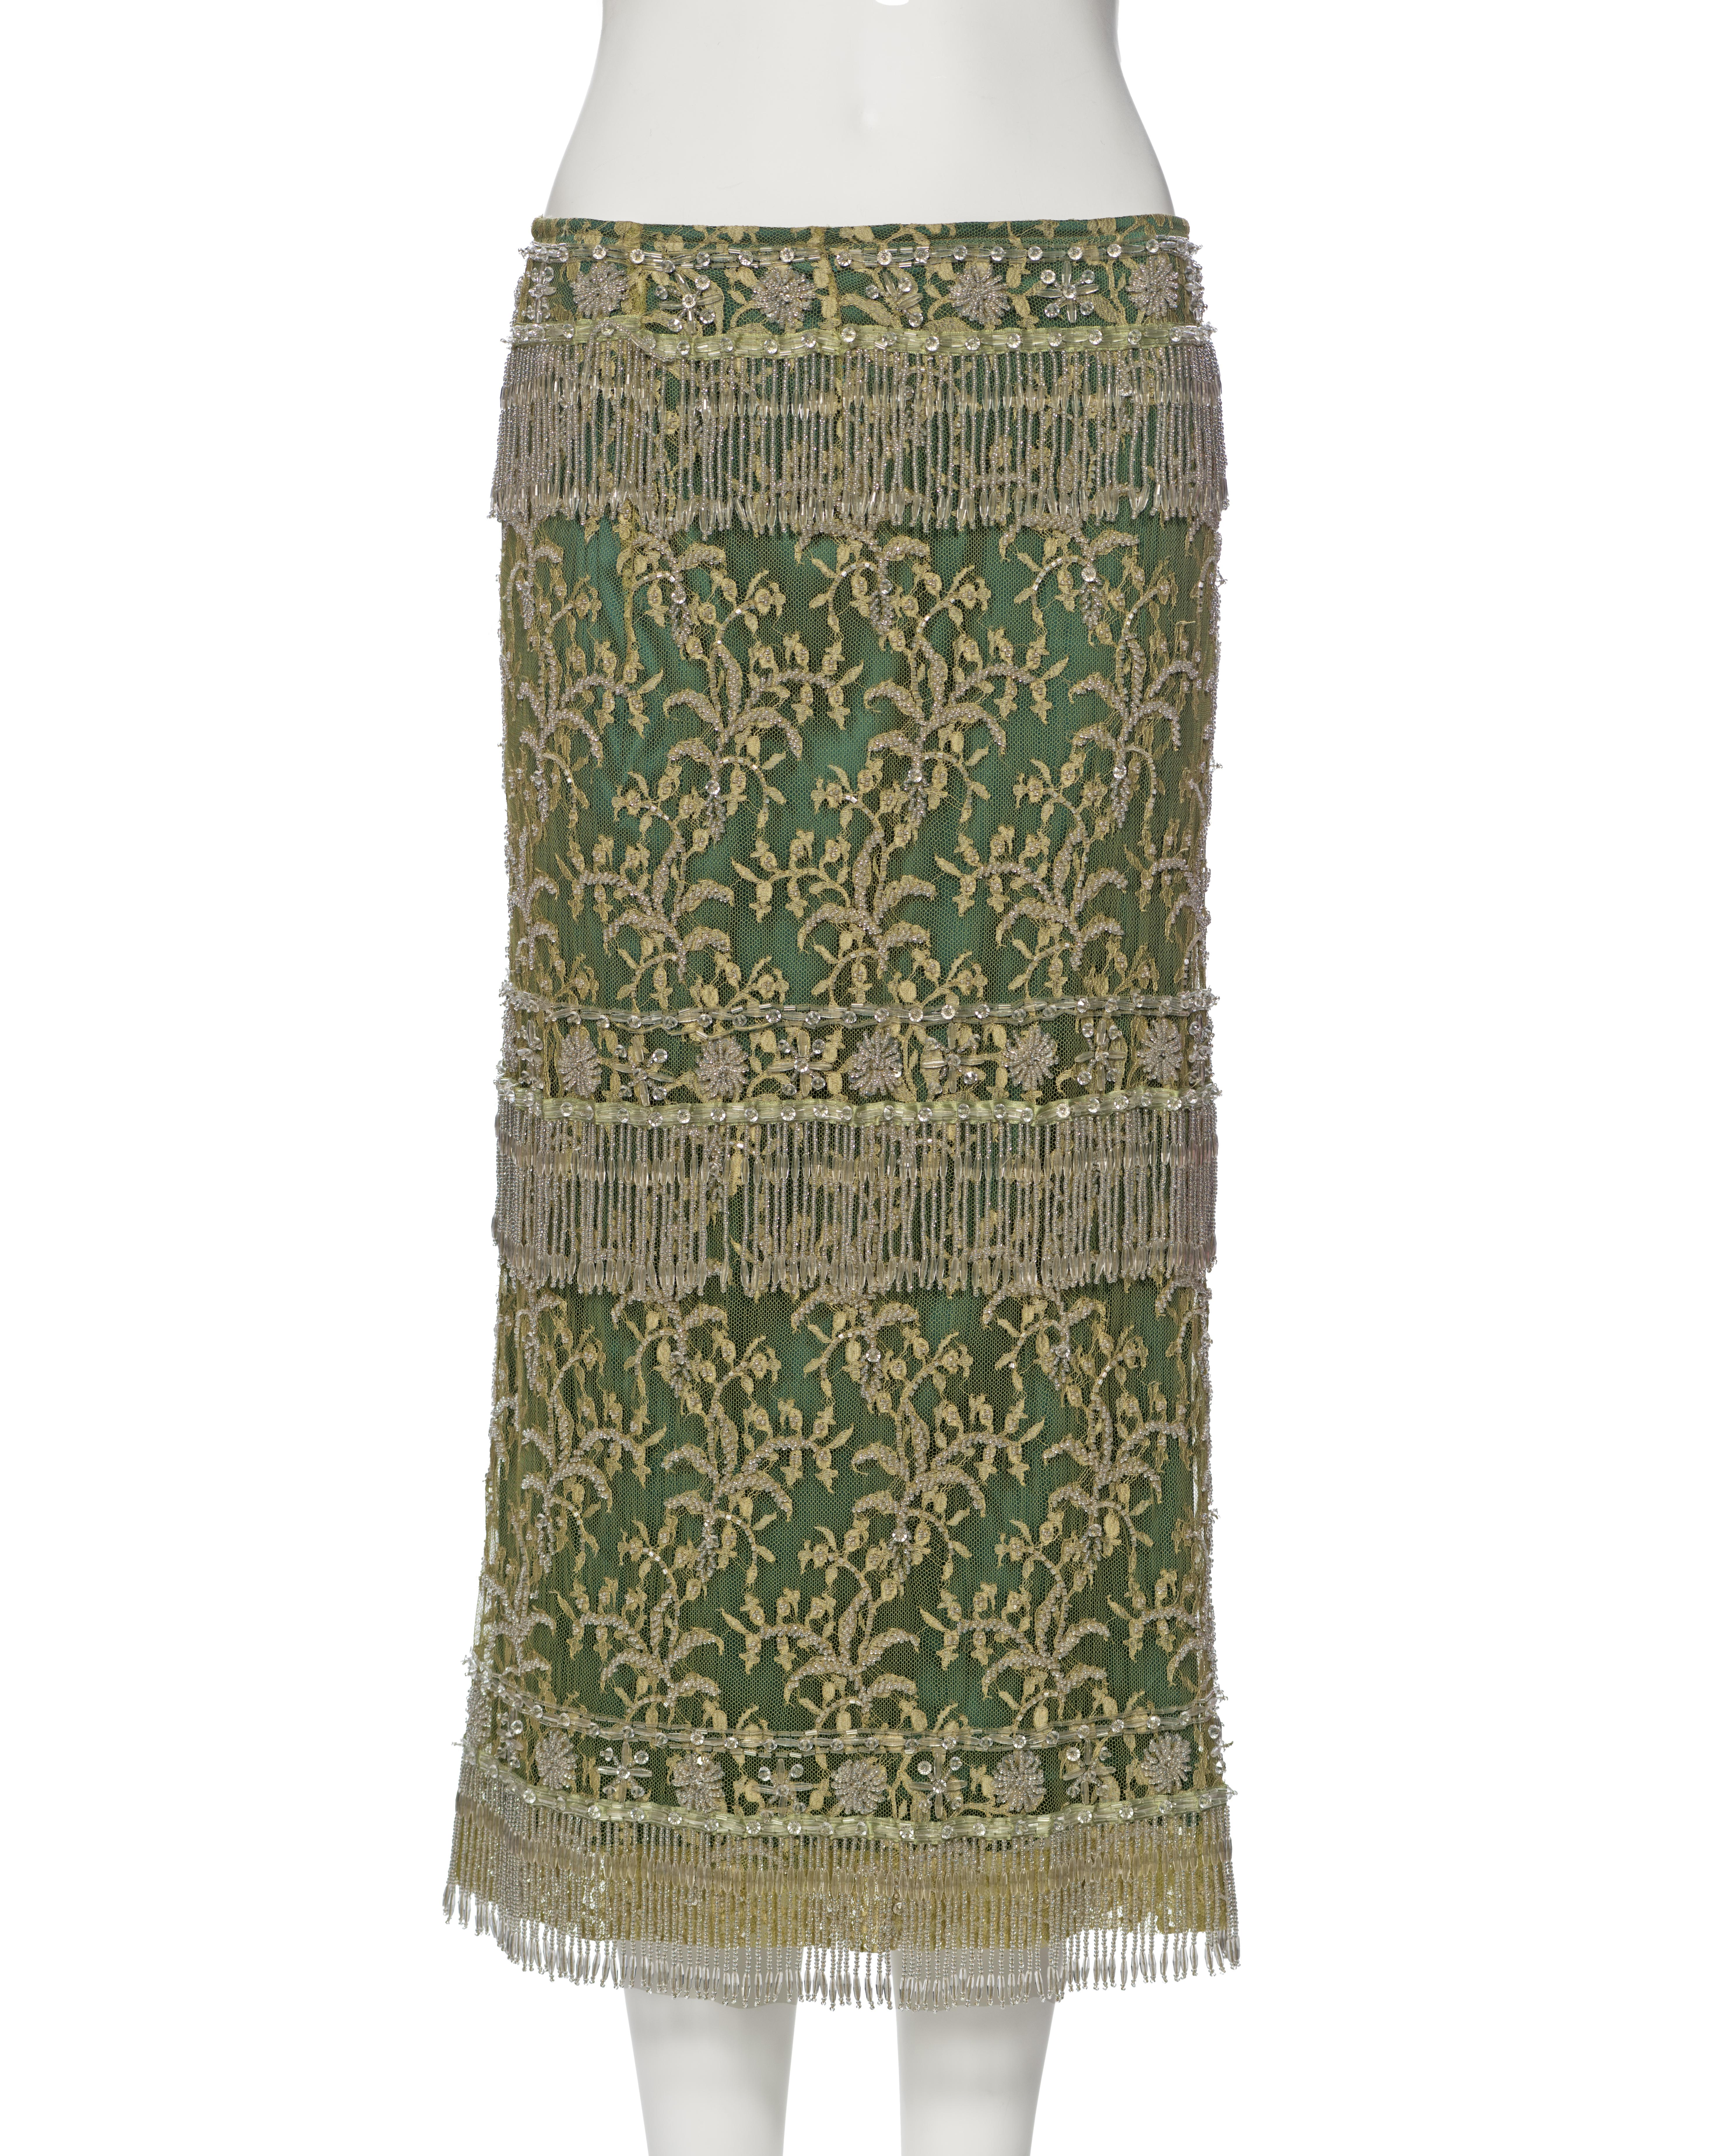 Dolce & Gabbana Beaded Chartreuse Lace Evening Skirt, ss 2000 In Excellent Condition For Sale In London, GB